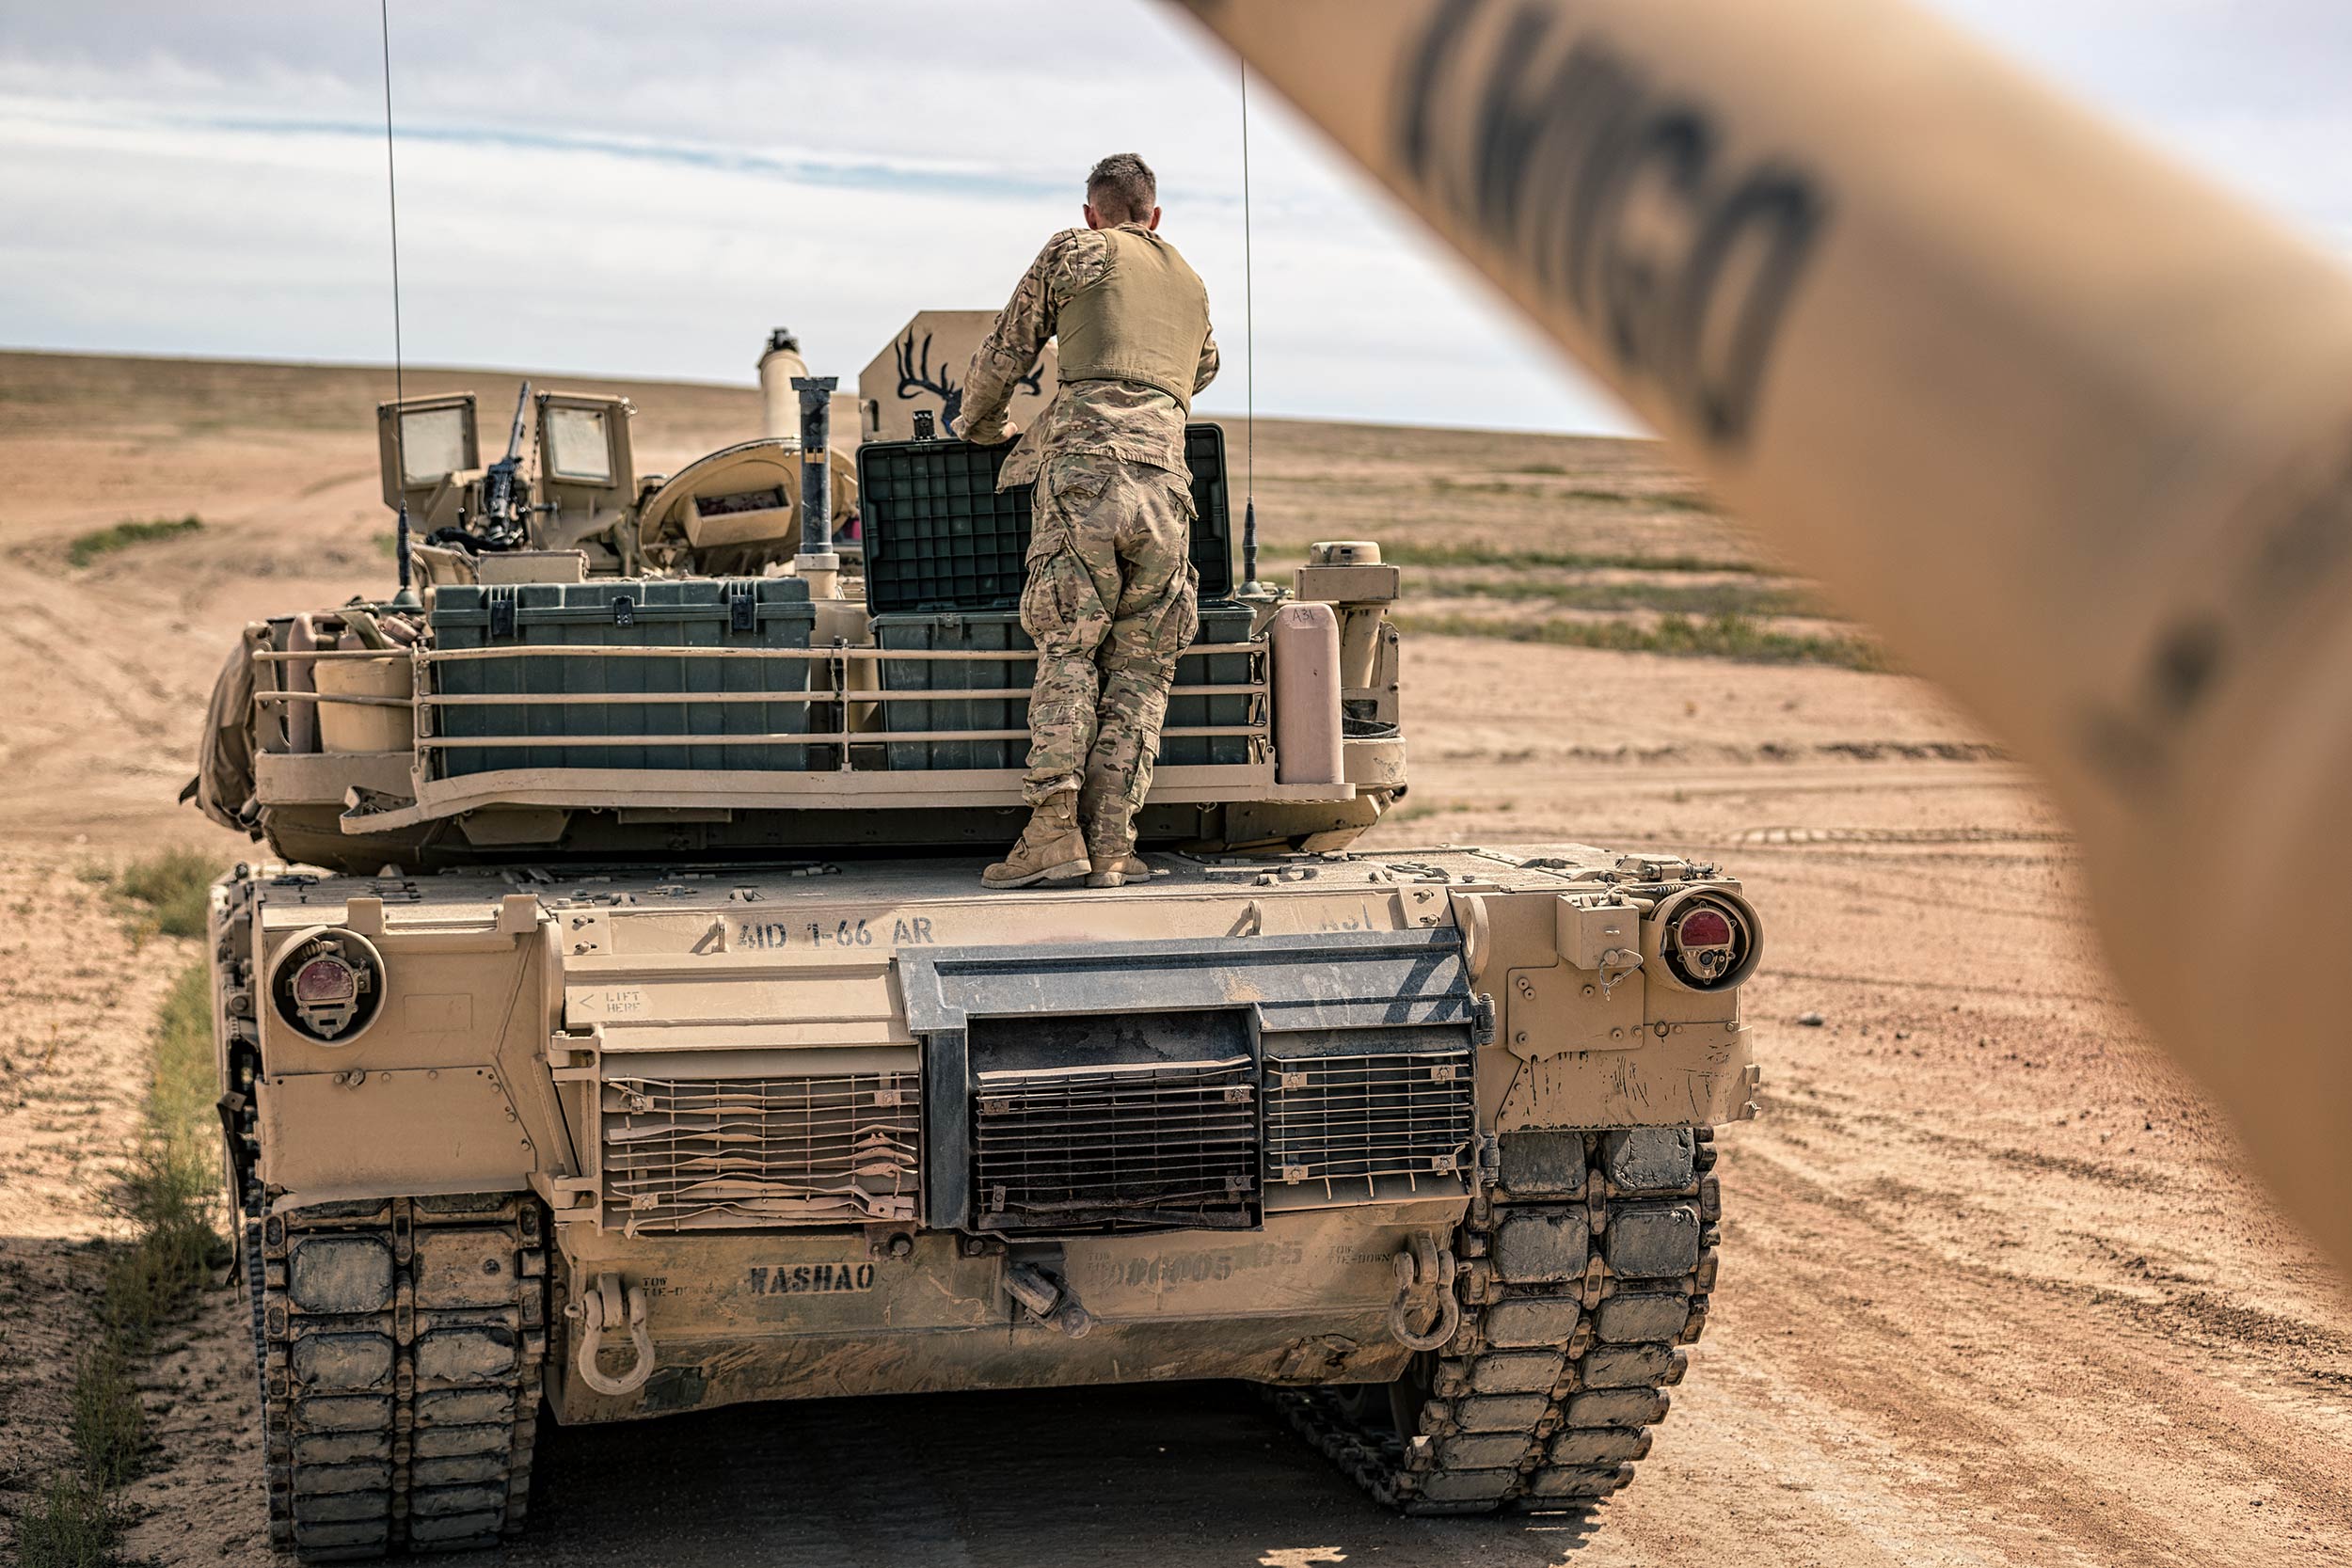 US Army Soldier preparing tank for exercises